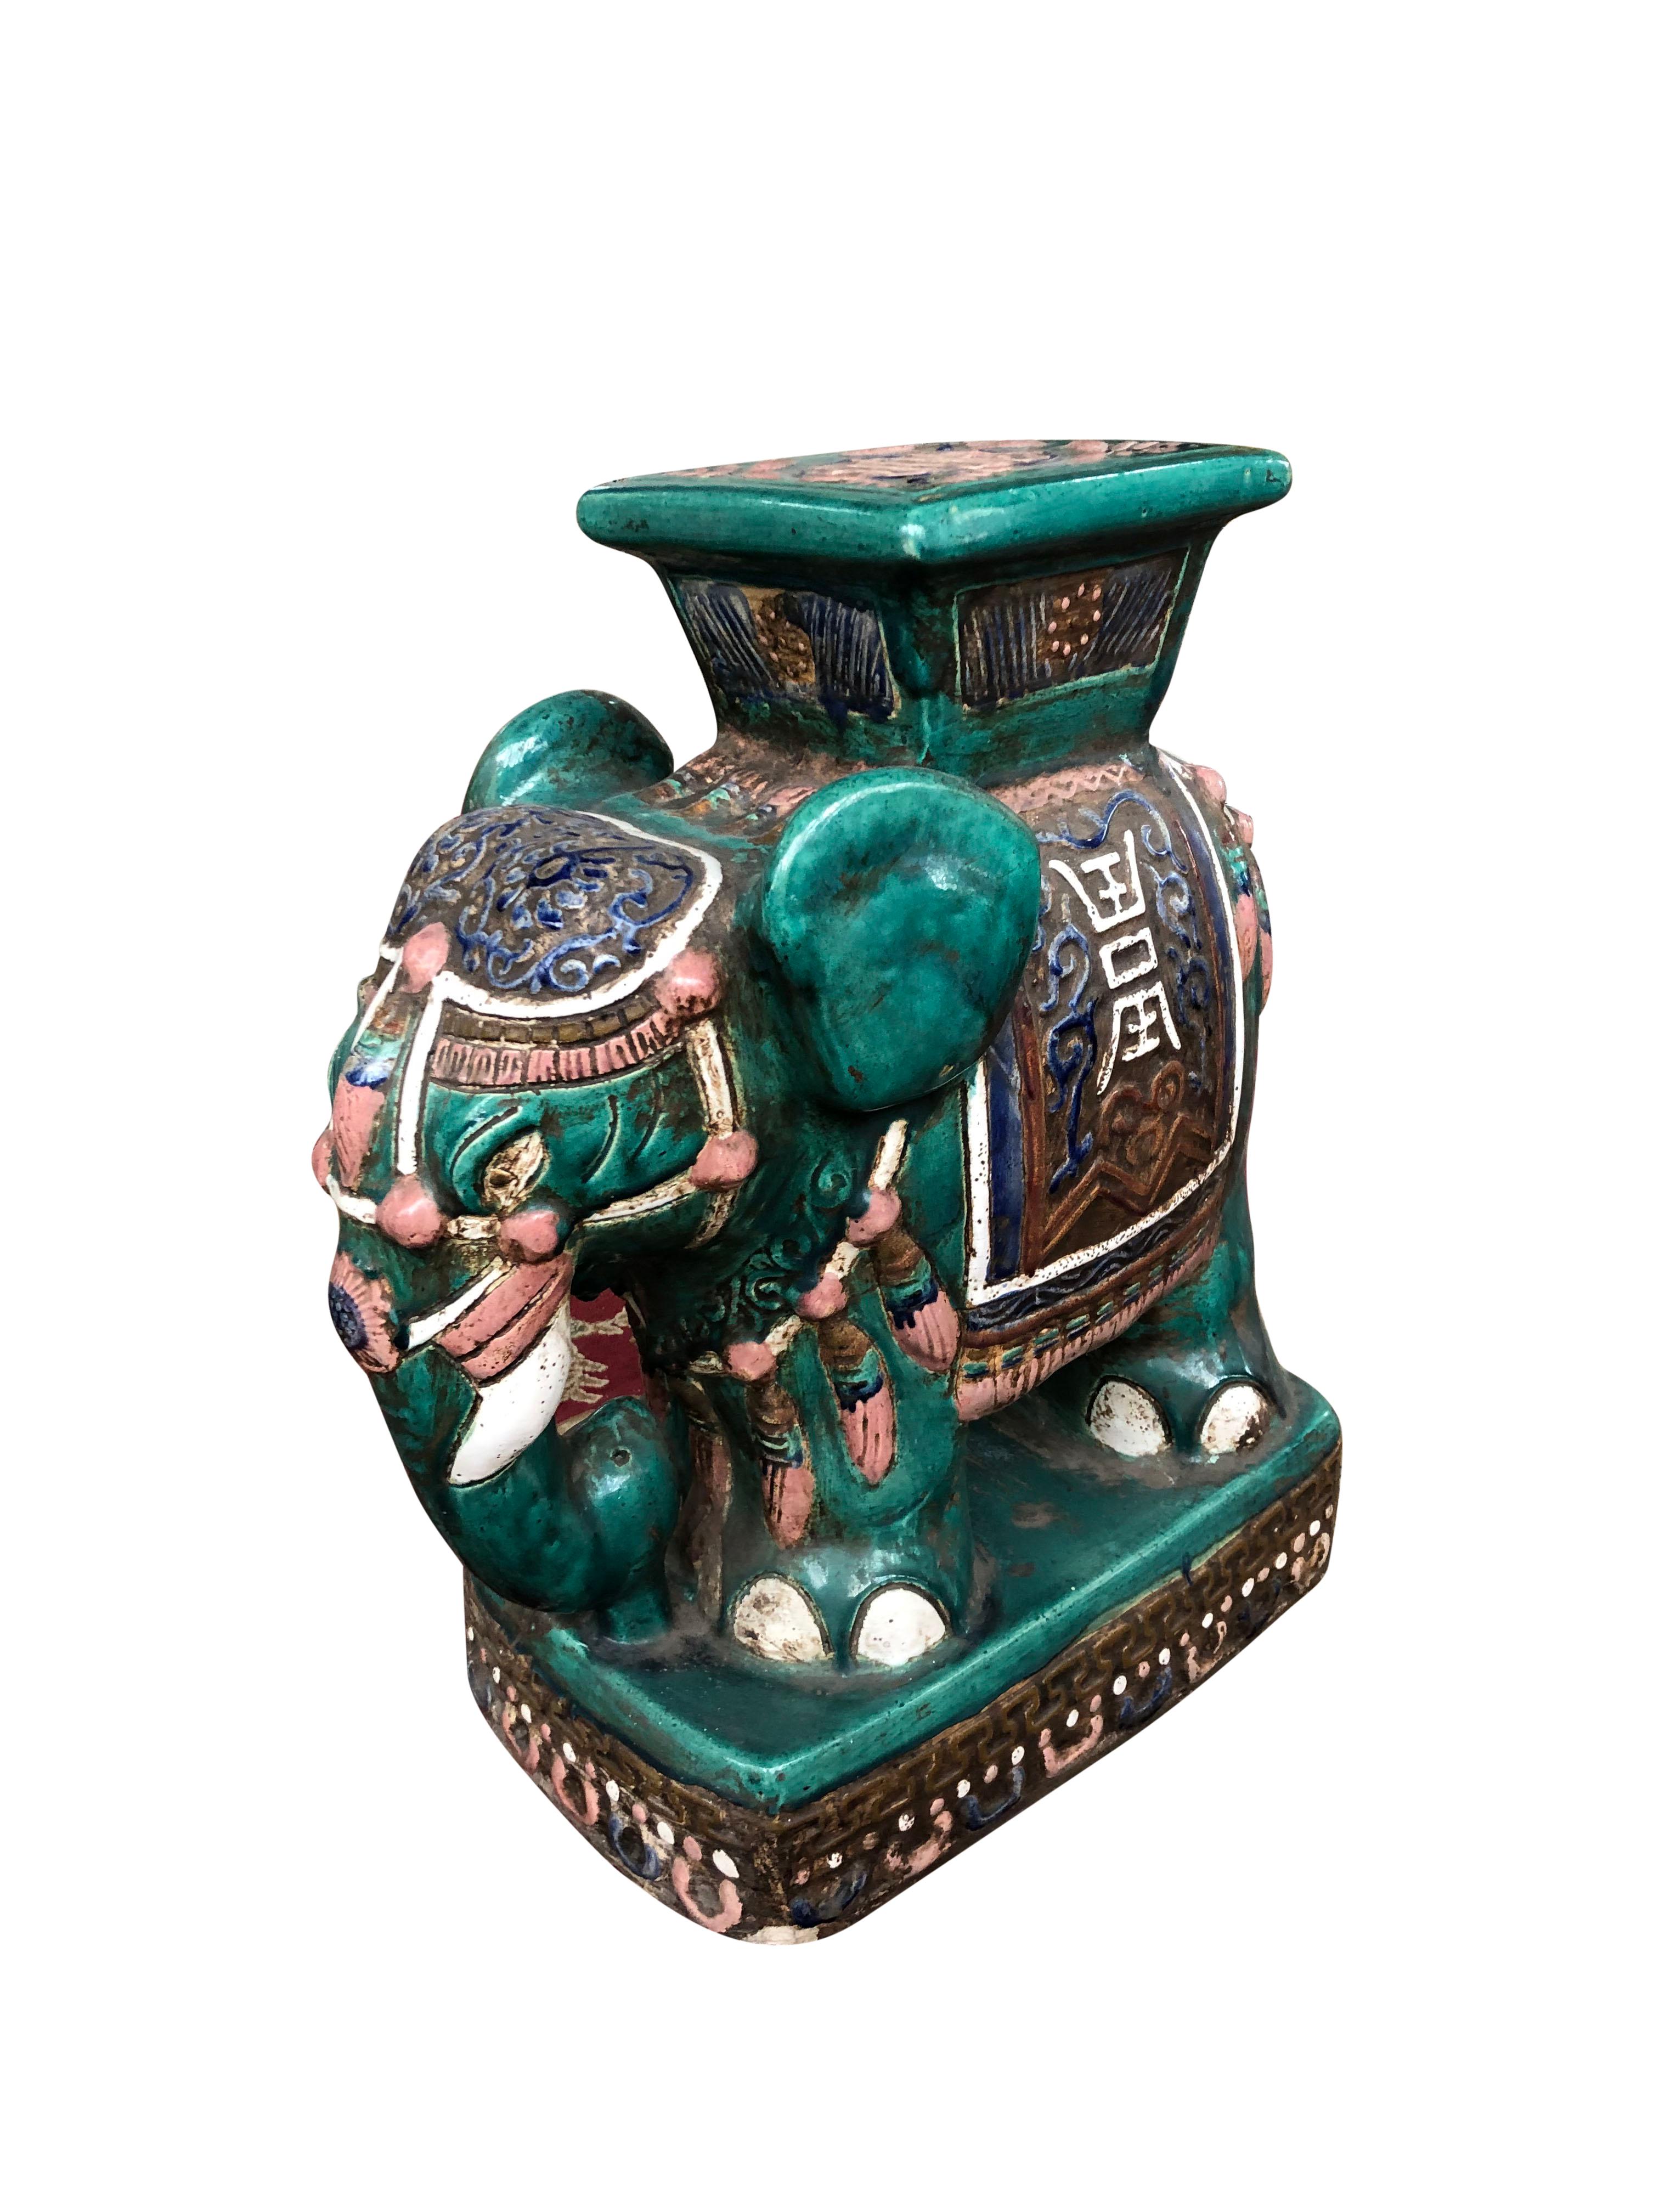 A superb and unusual large vintage Chinese ceramic elephant pedestal, 20th century. Standing at over 2 feet tall and designed with beautiful colours and patterns. Offered in good condition and ready for use.